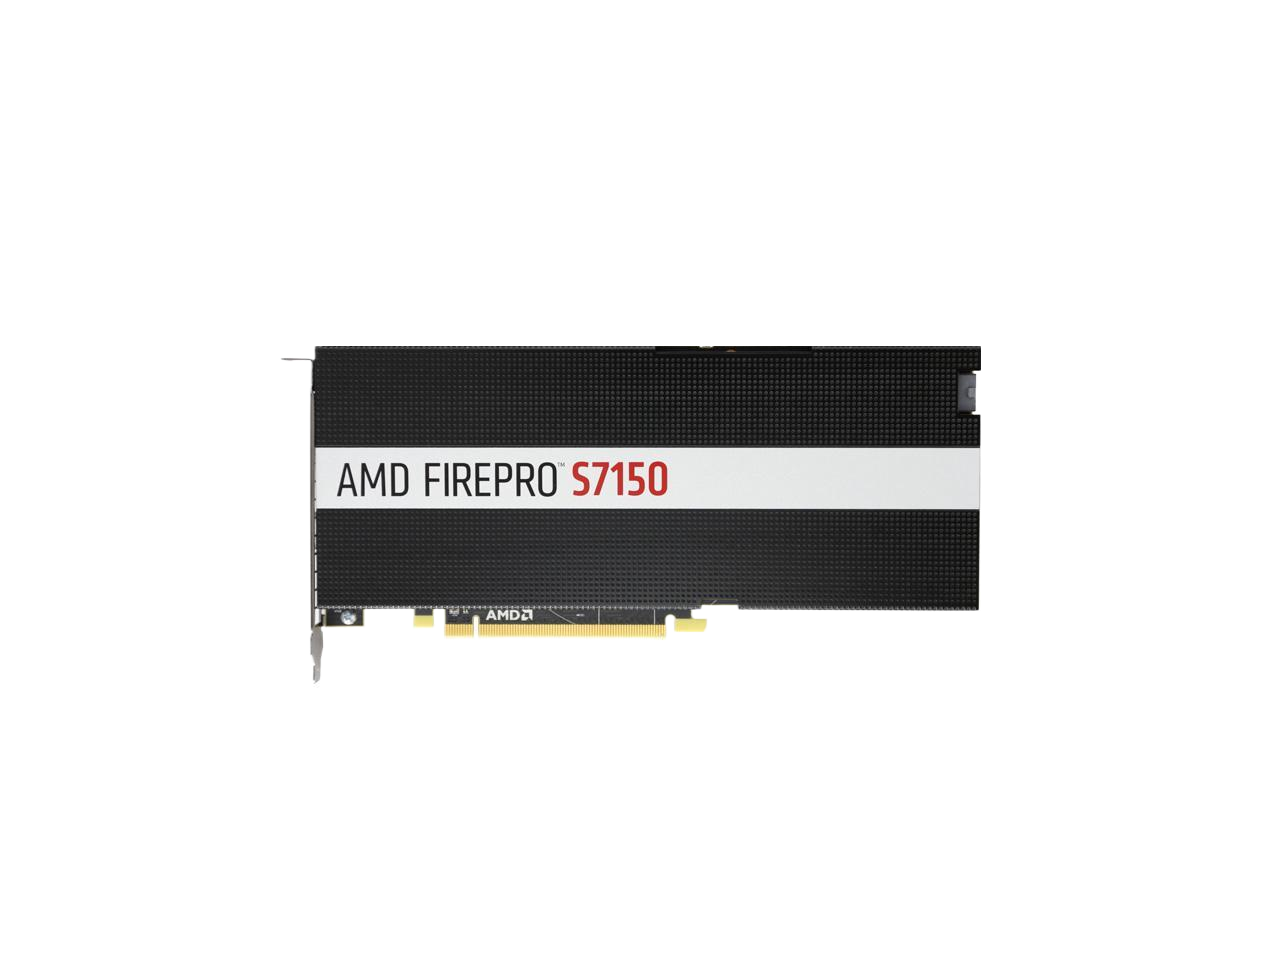 Sapphire FirePro S7150 8GB GDDR5 PCI Express 3.0 x16 Full-length/Full-height Single Slot Space Required Workstation Graphics Card